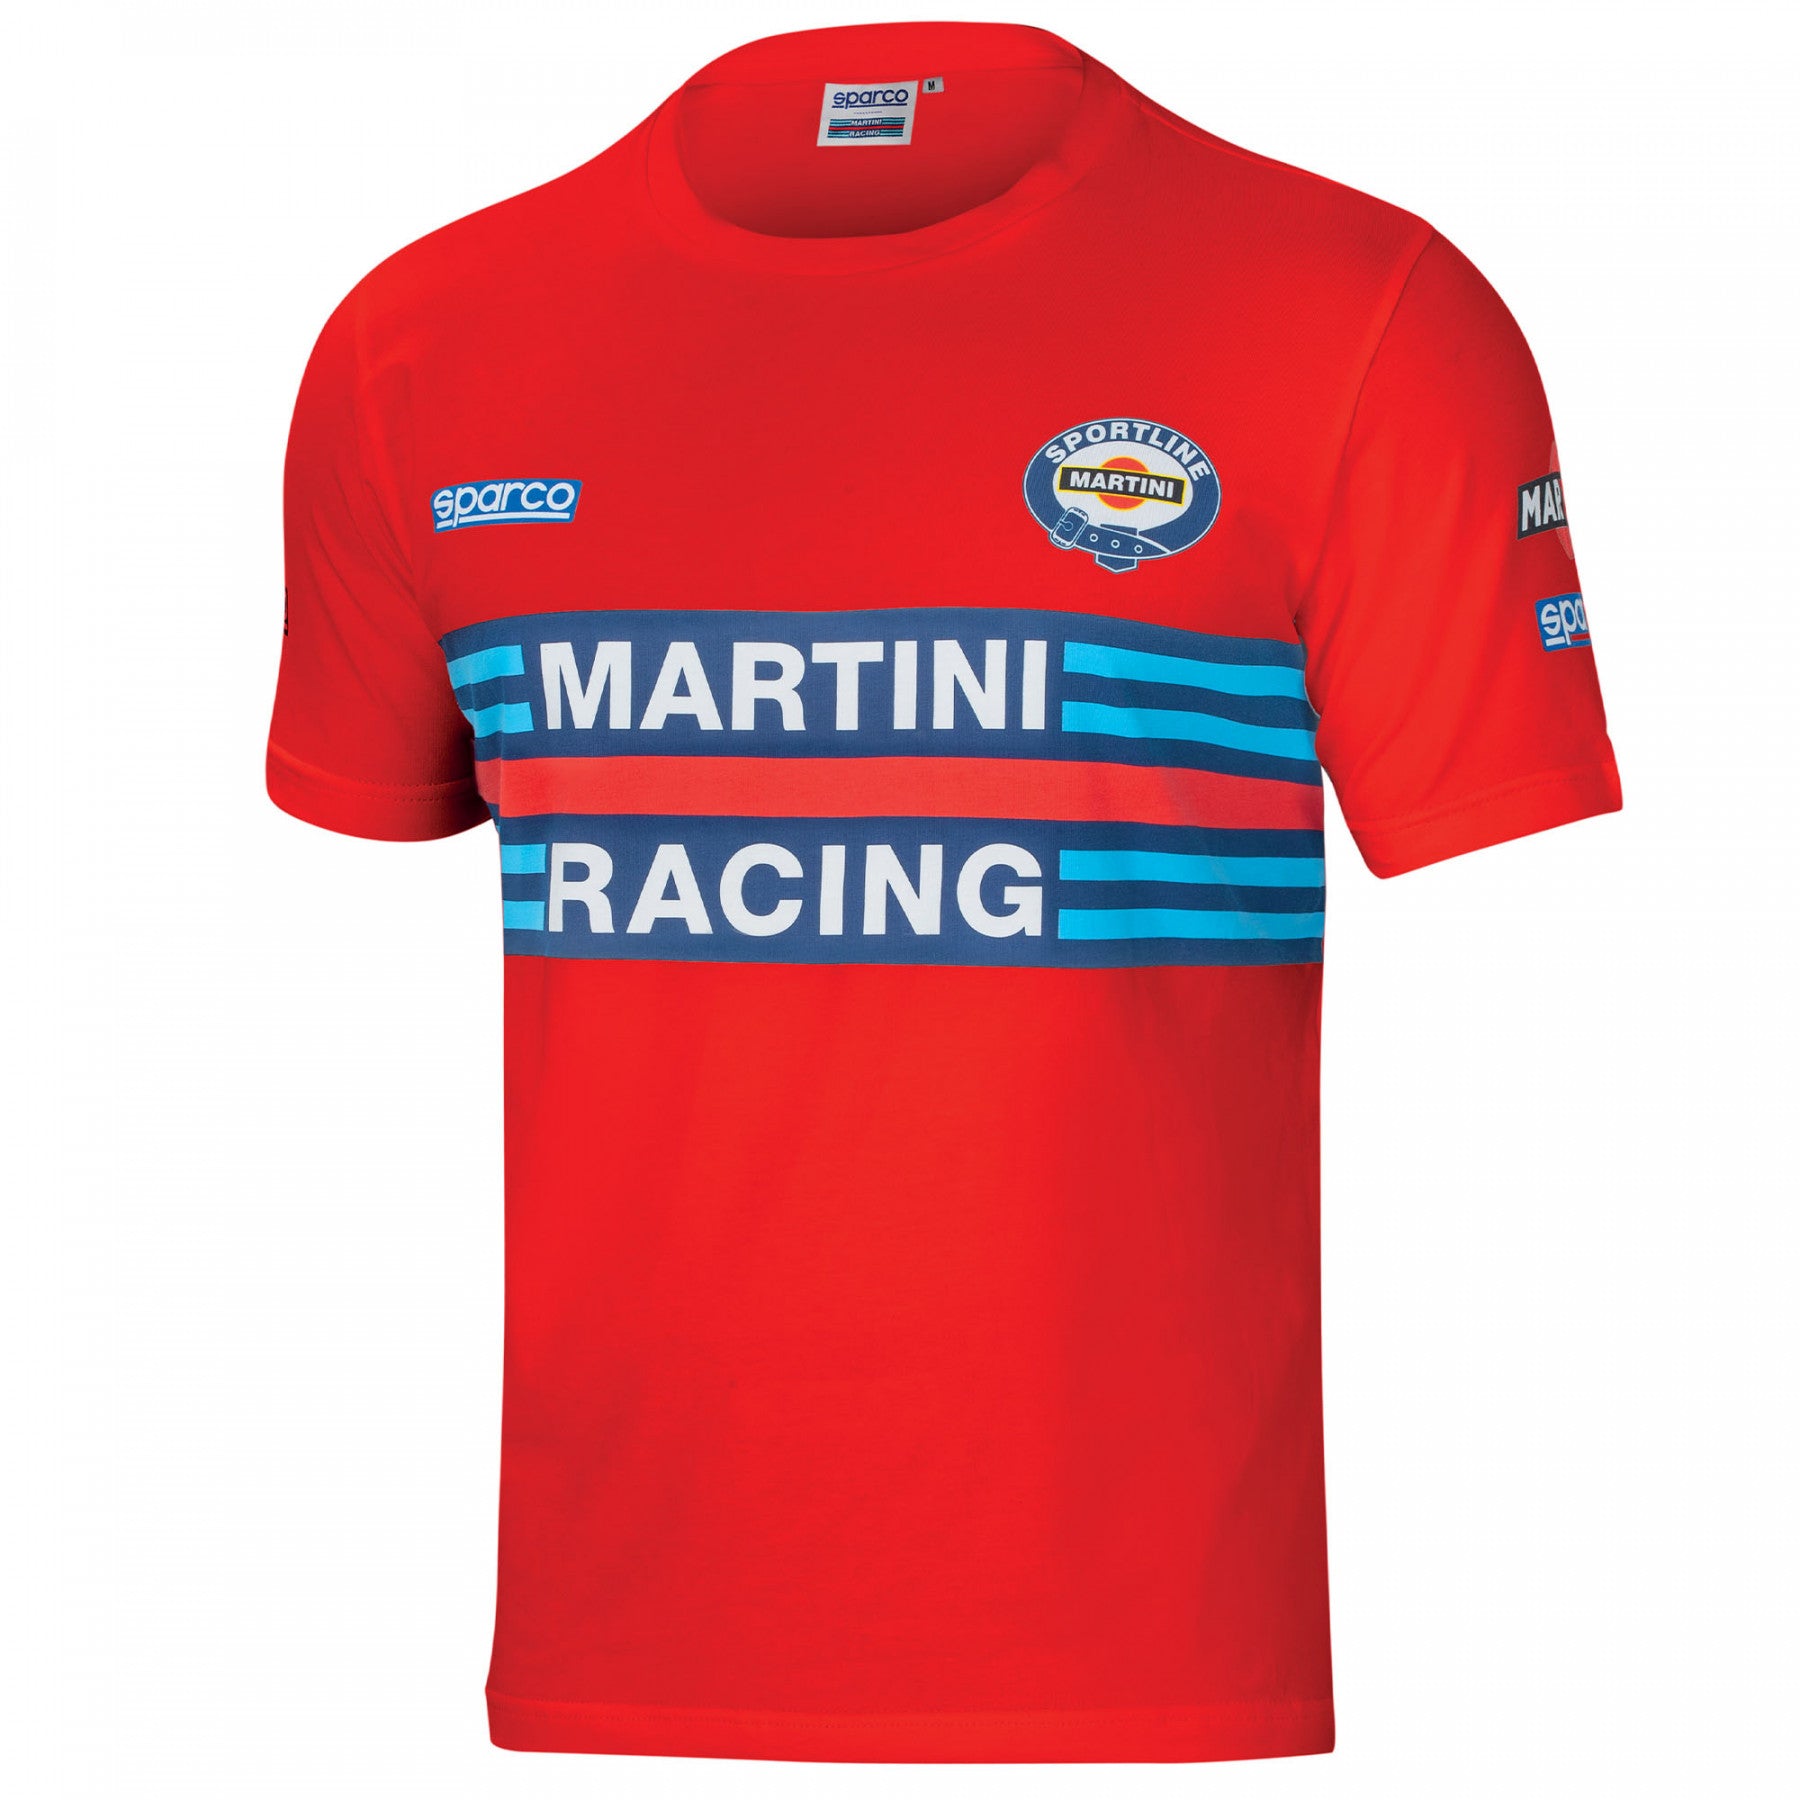 SPARCO 01274MRRS1S T-shirt MARTINI RACING, red, size S Photo-0 